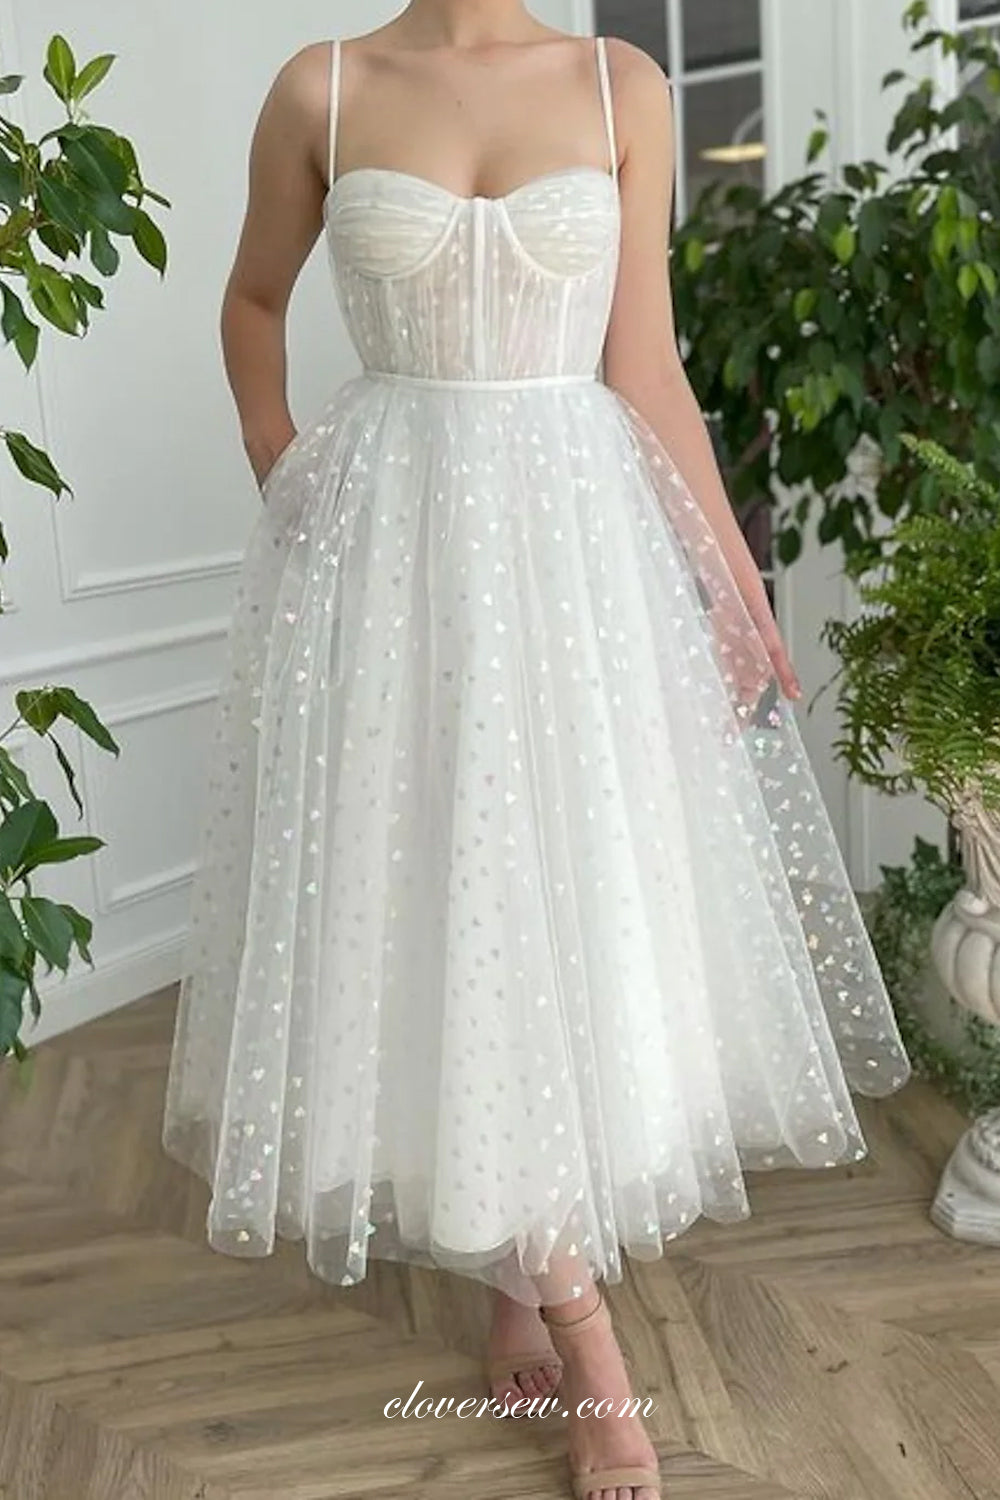 White Heart Embroidery Spaghetti Strap Ankle Length Wedding Dresses, CW0313